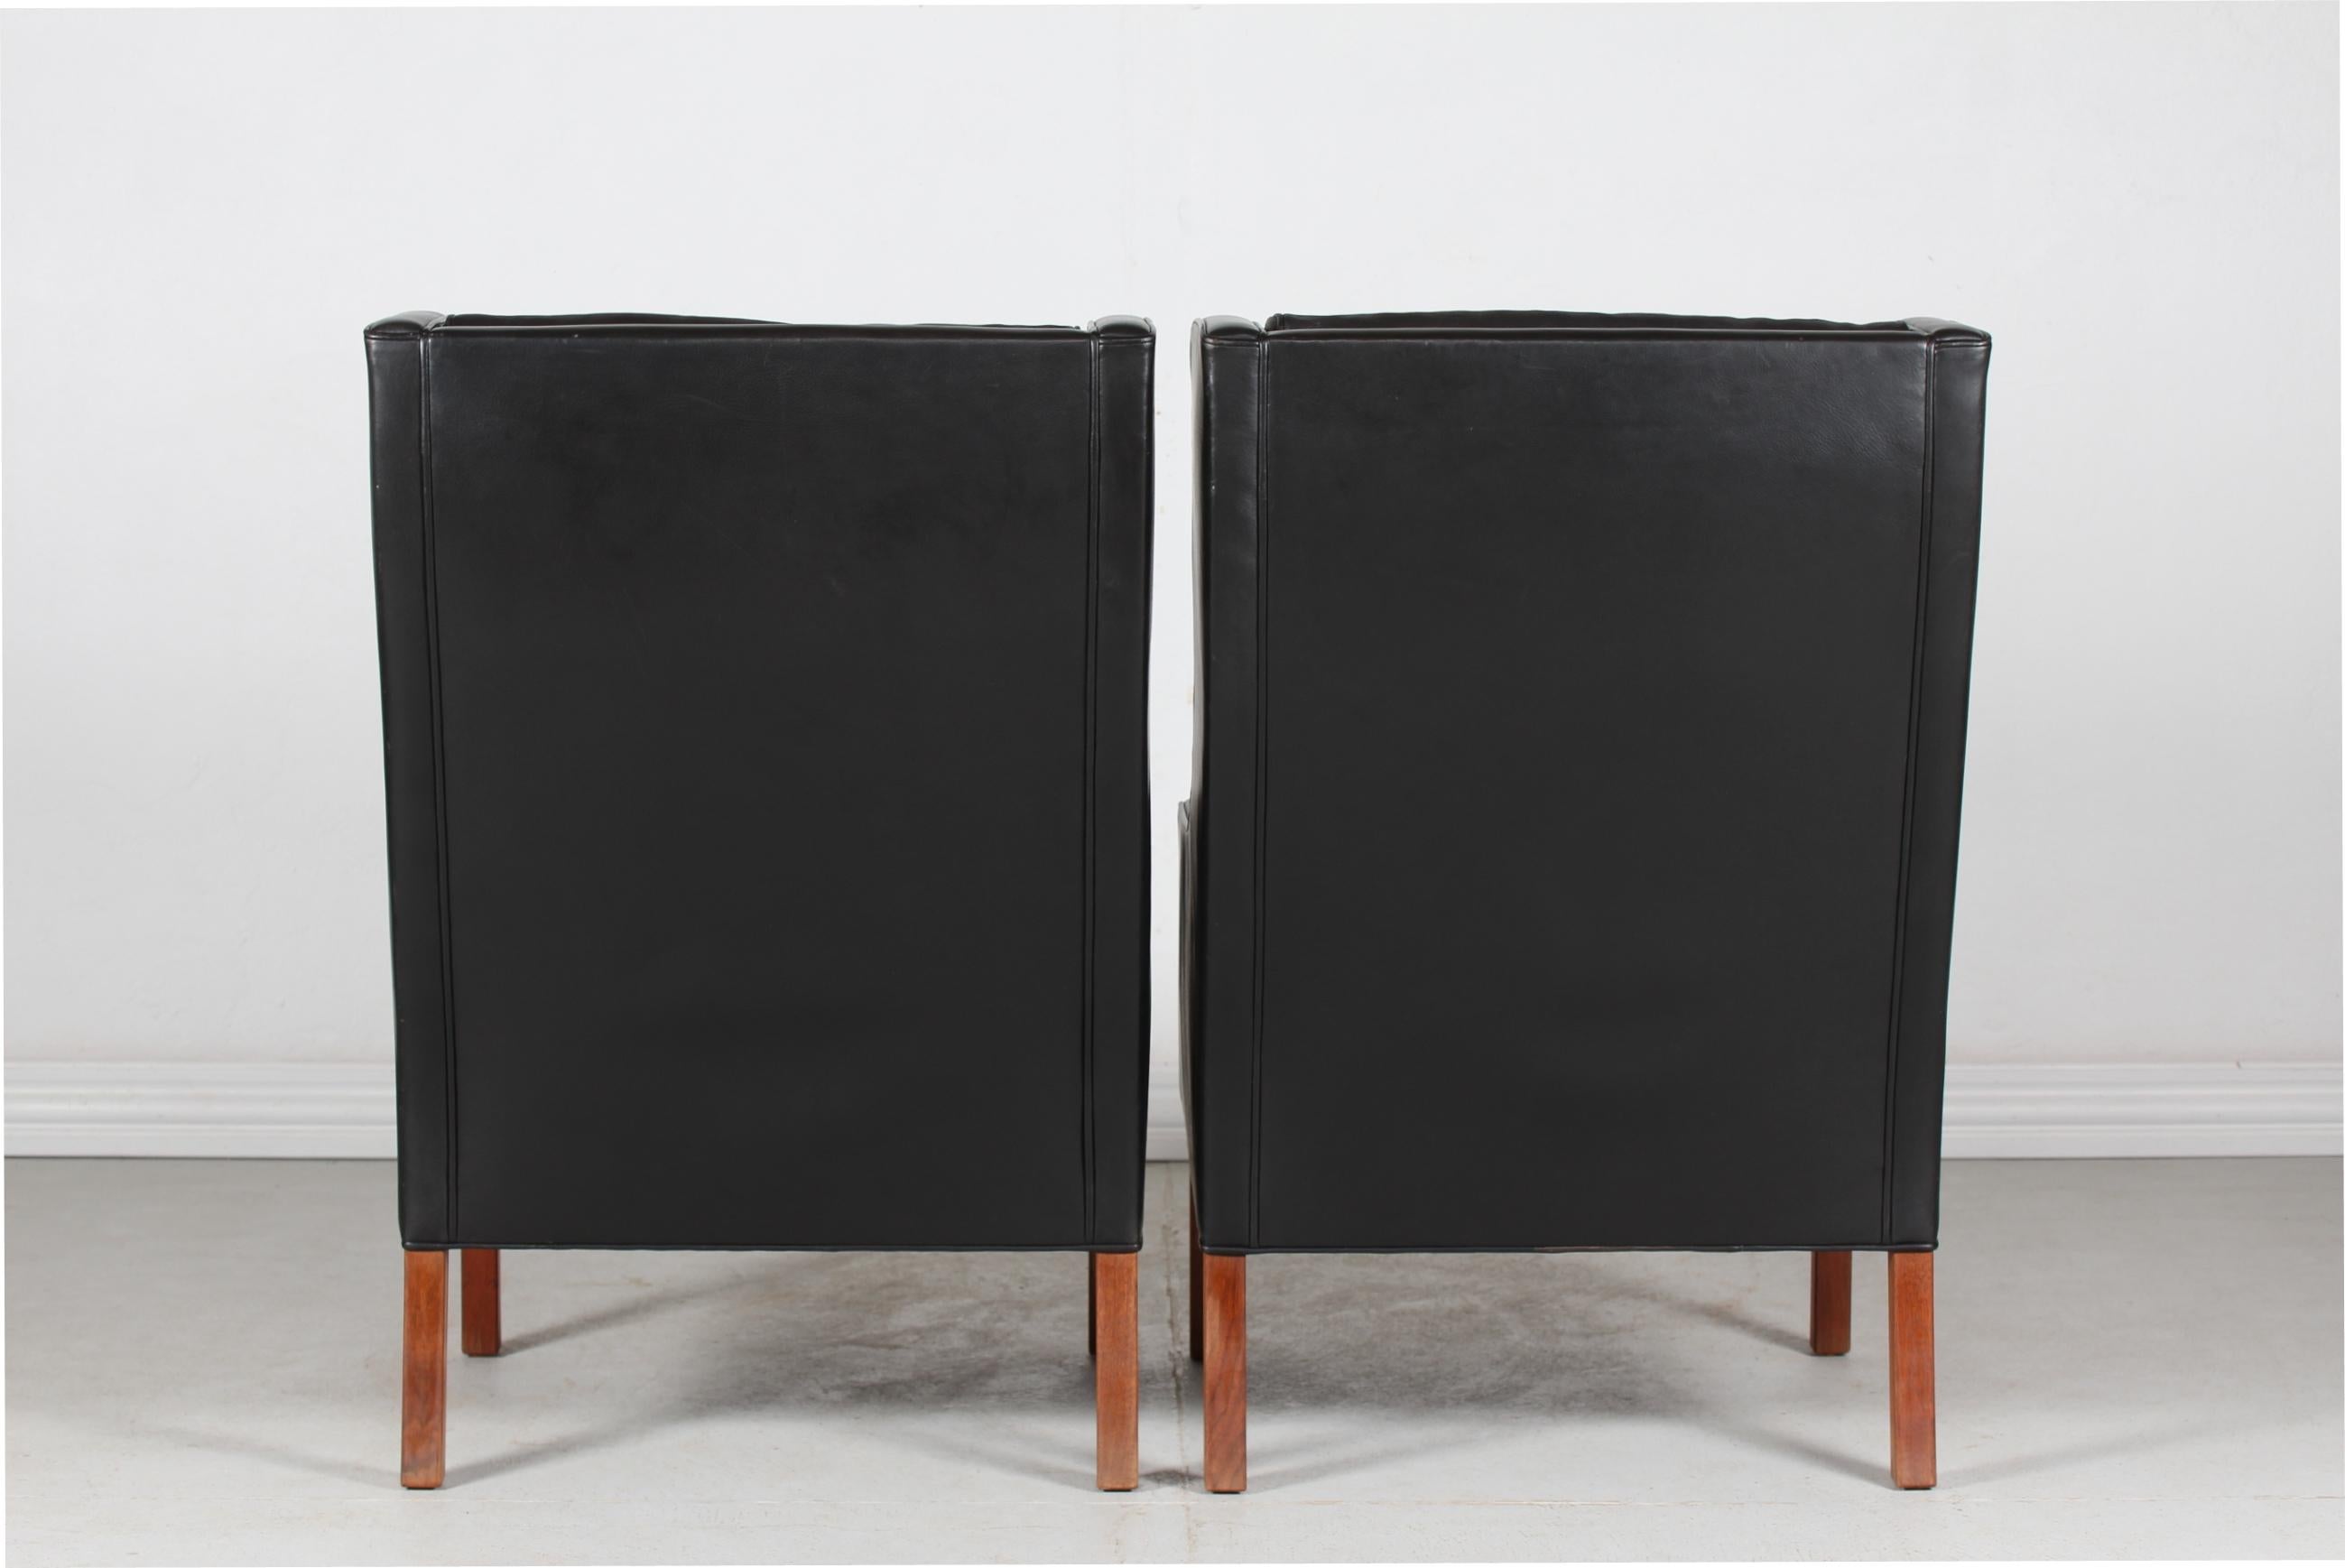 Danish Børge Mogensen Pair of Chairs 2204 with Black Leather by Fredericia Stolefabrik For Sale